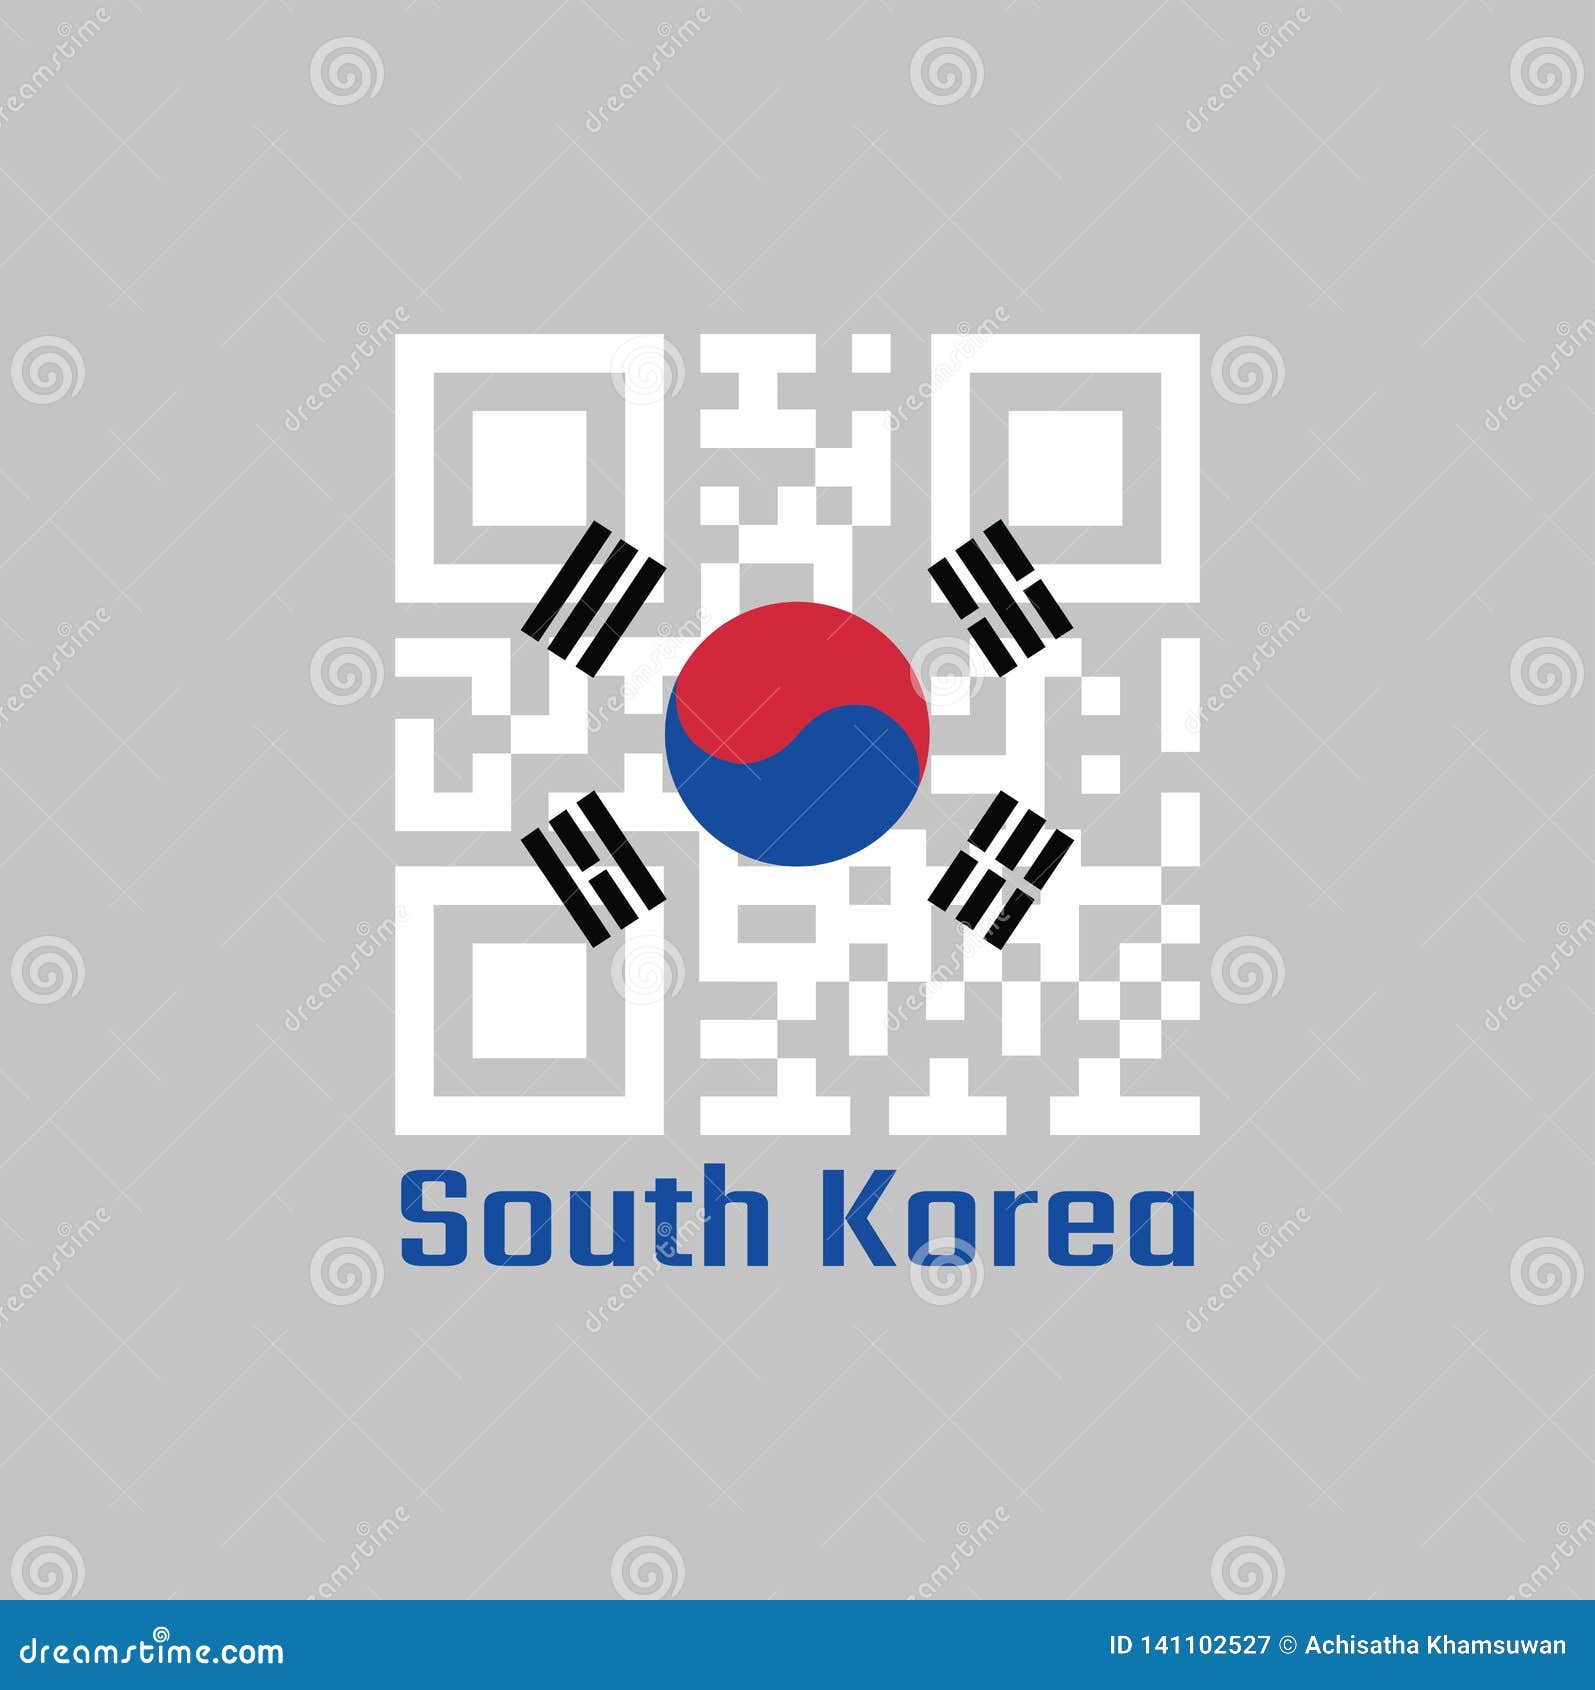 qr code set the color of south korea flag. a red and blue taeguk, izing balance on white and black line